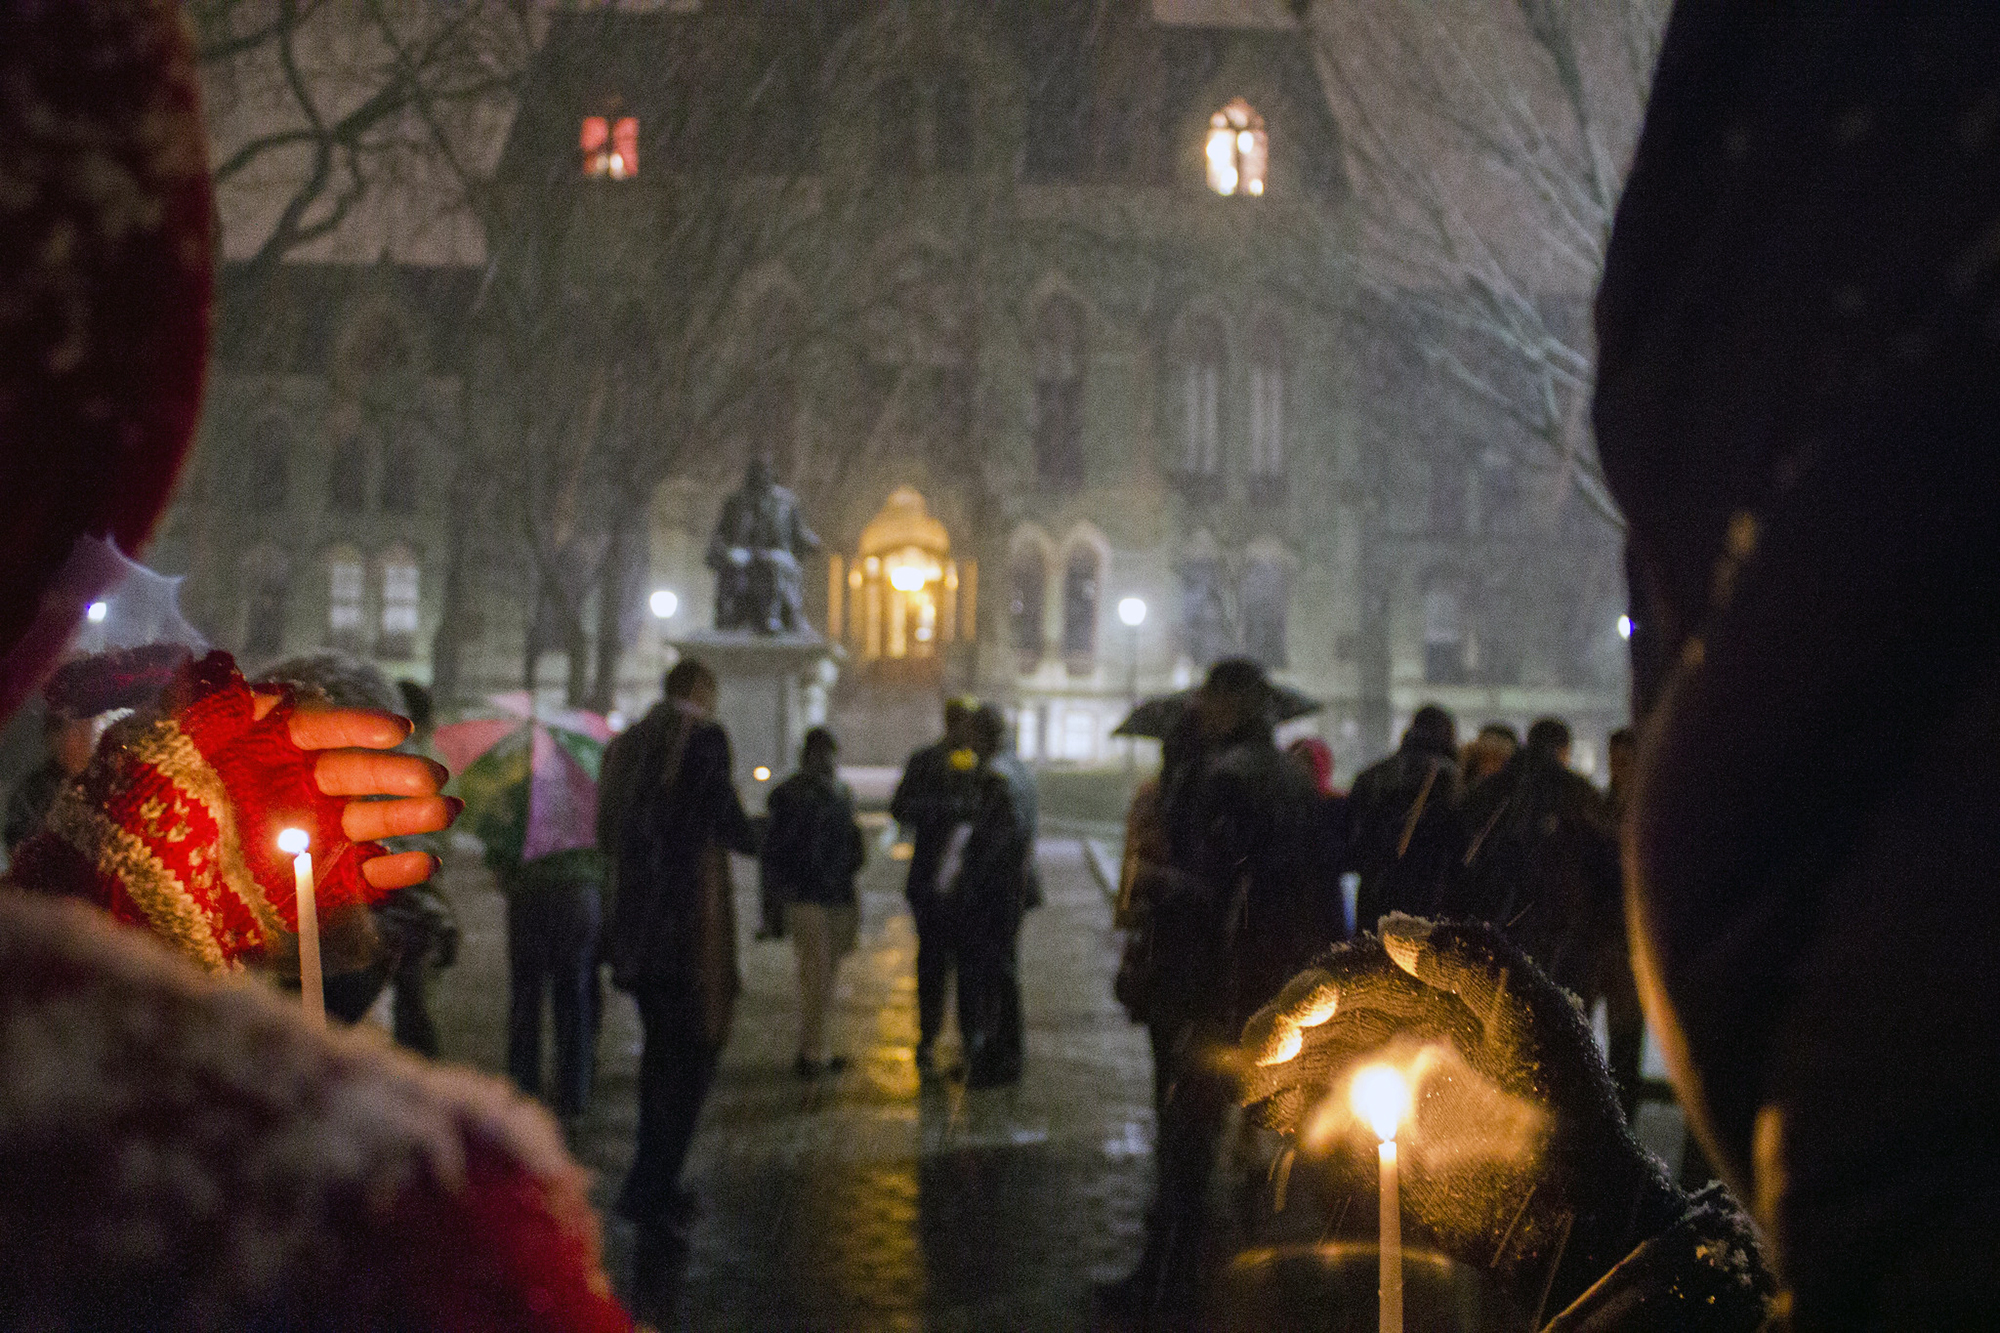 Walkers cup lit candles with mittened hands as snow falls on College Hall